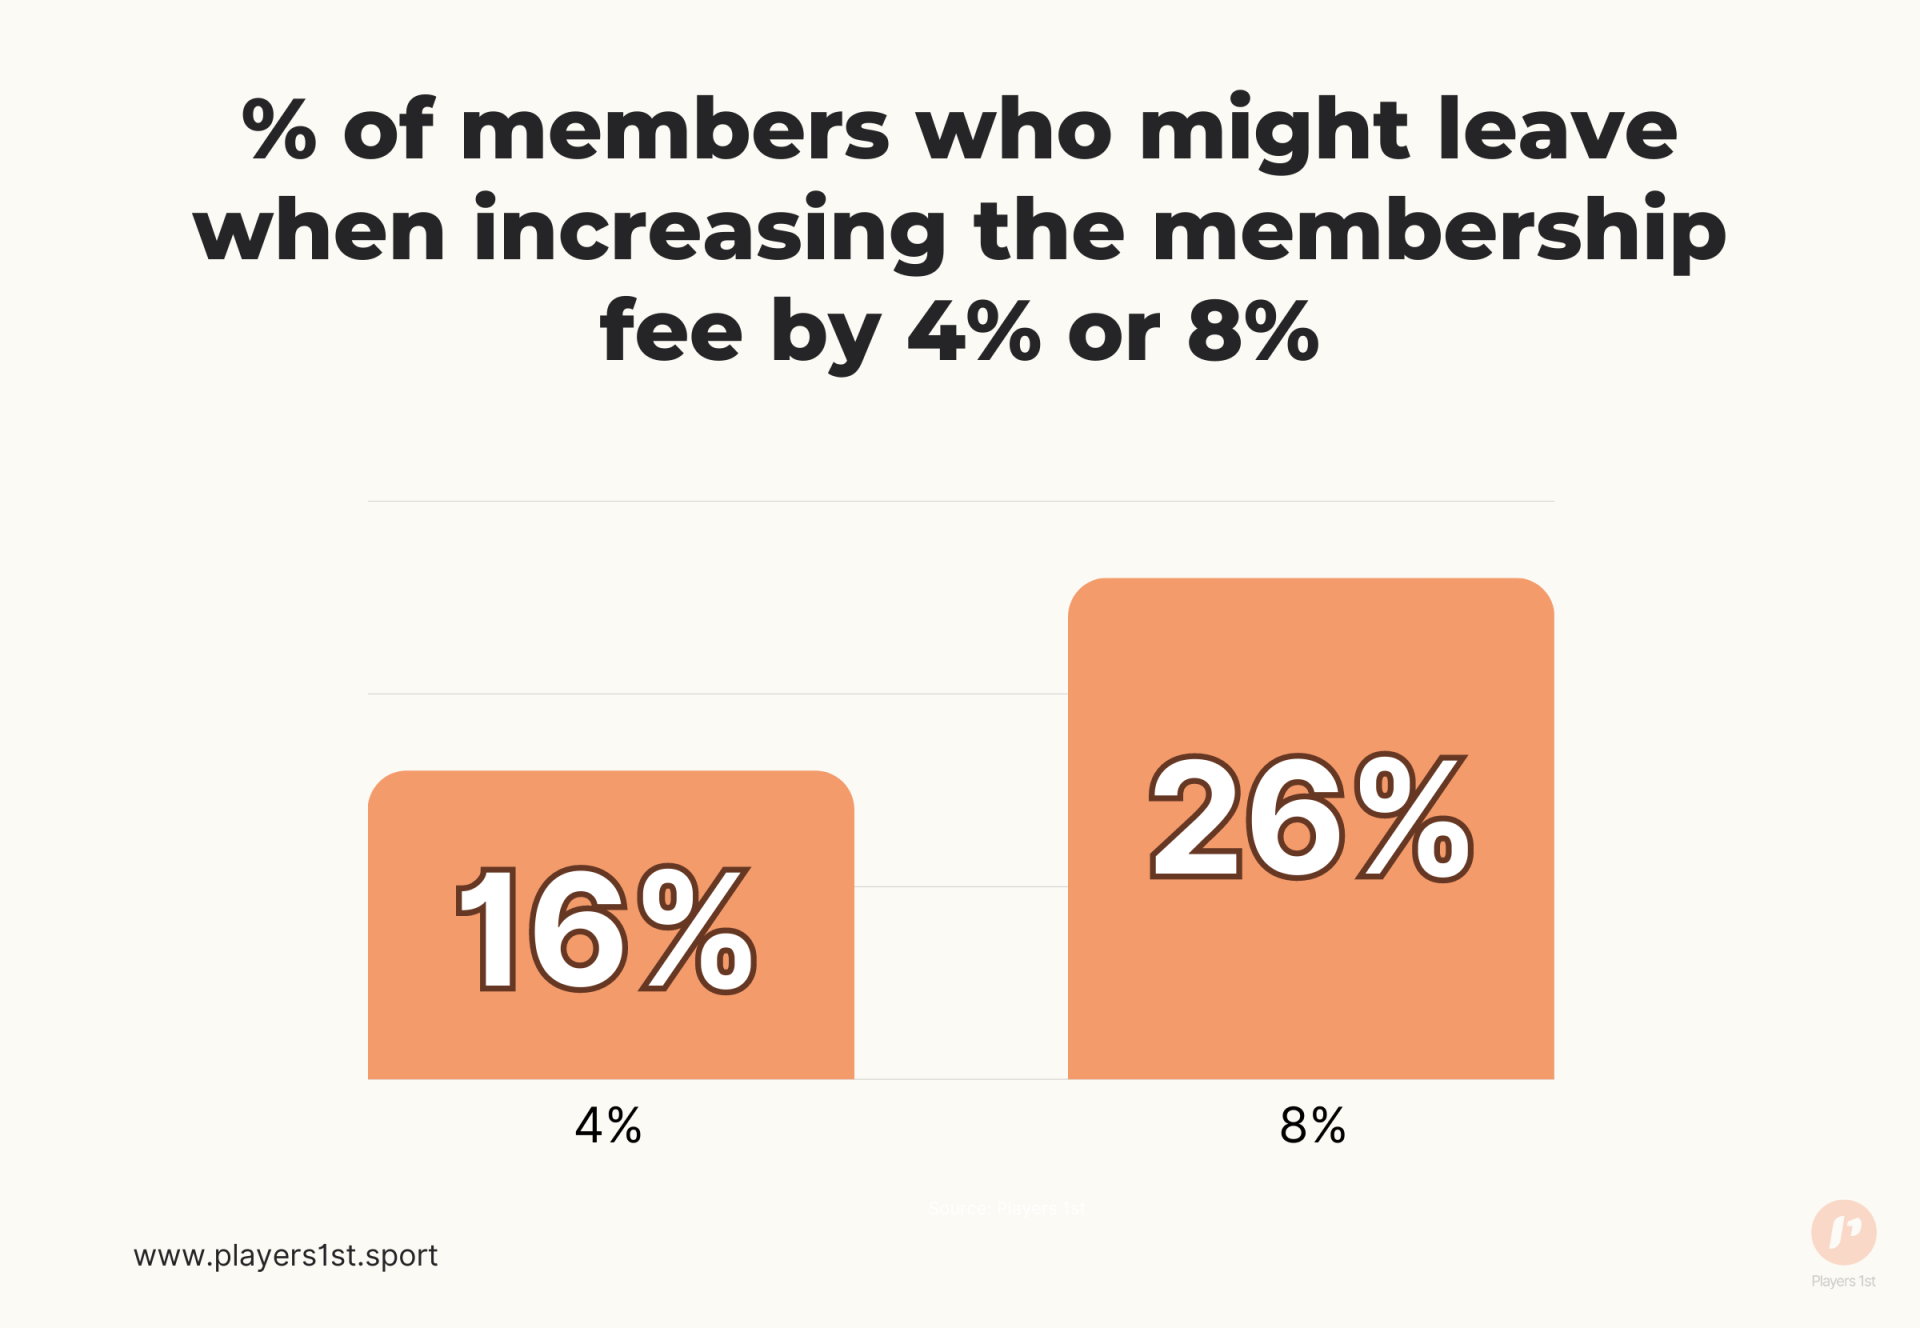 % of members who might leave when increasing the membership fee by 4% or 8%.